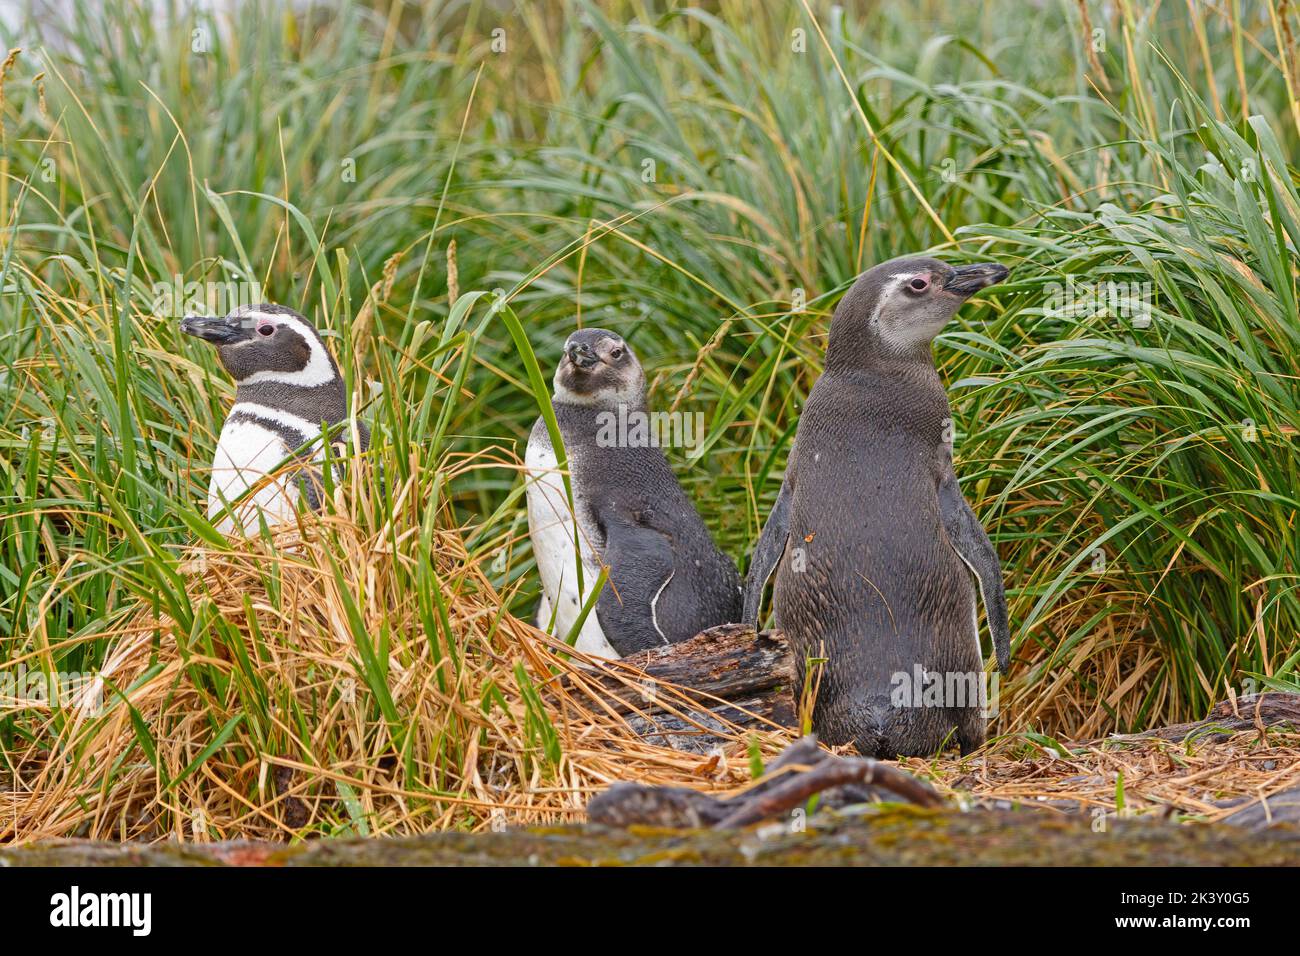 Magellanic Penguins in the Grass on a Nesting Island in Tierra Del Fuego in Chile Stock Photo